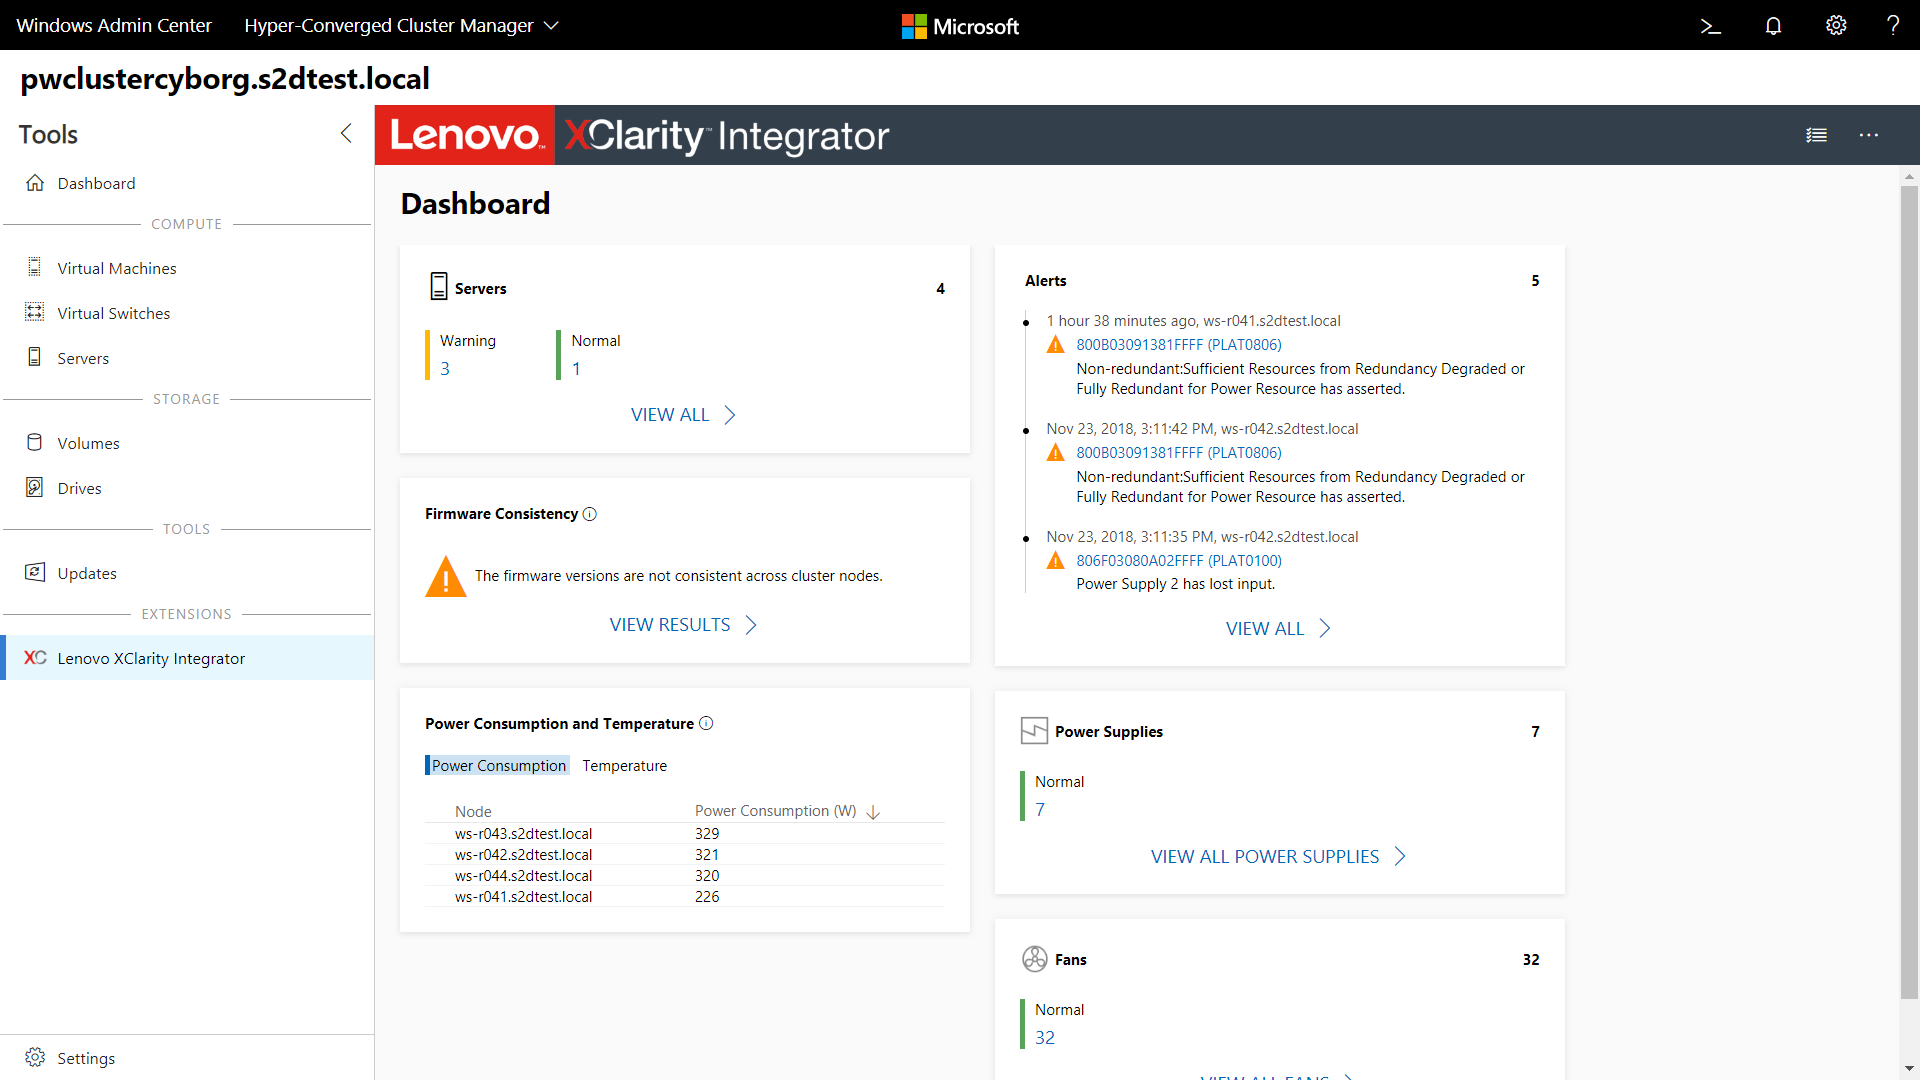 Screenshot of the Lenovo XClarity Integrator extension tool showing the Dashboard page.